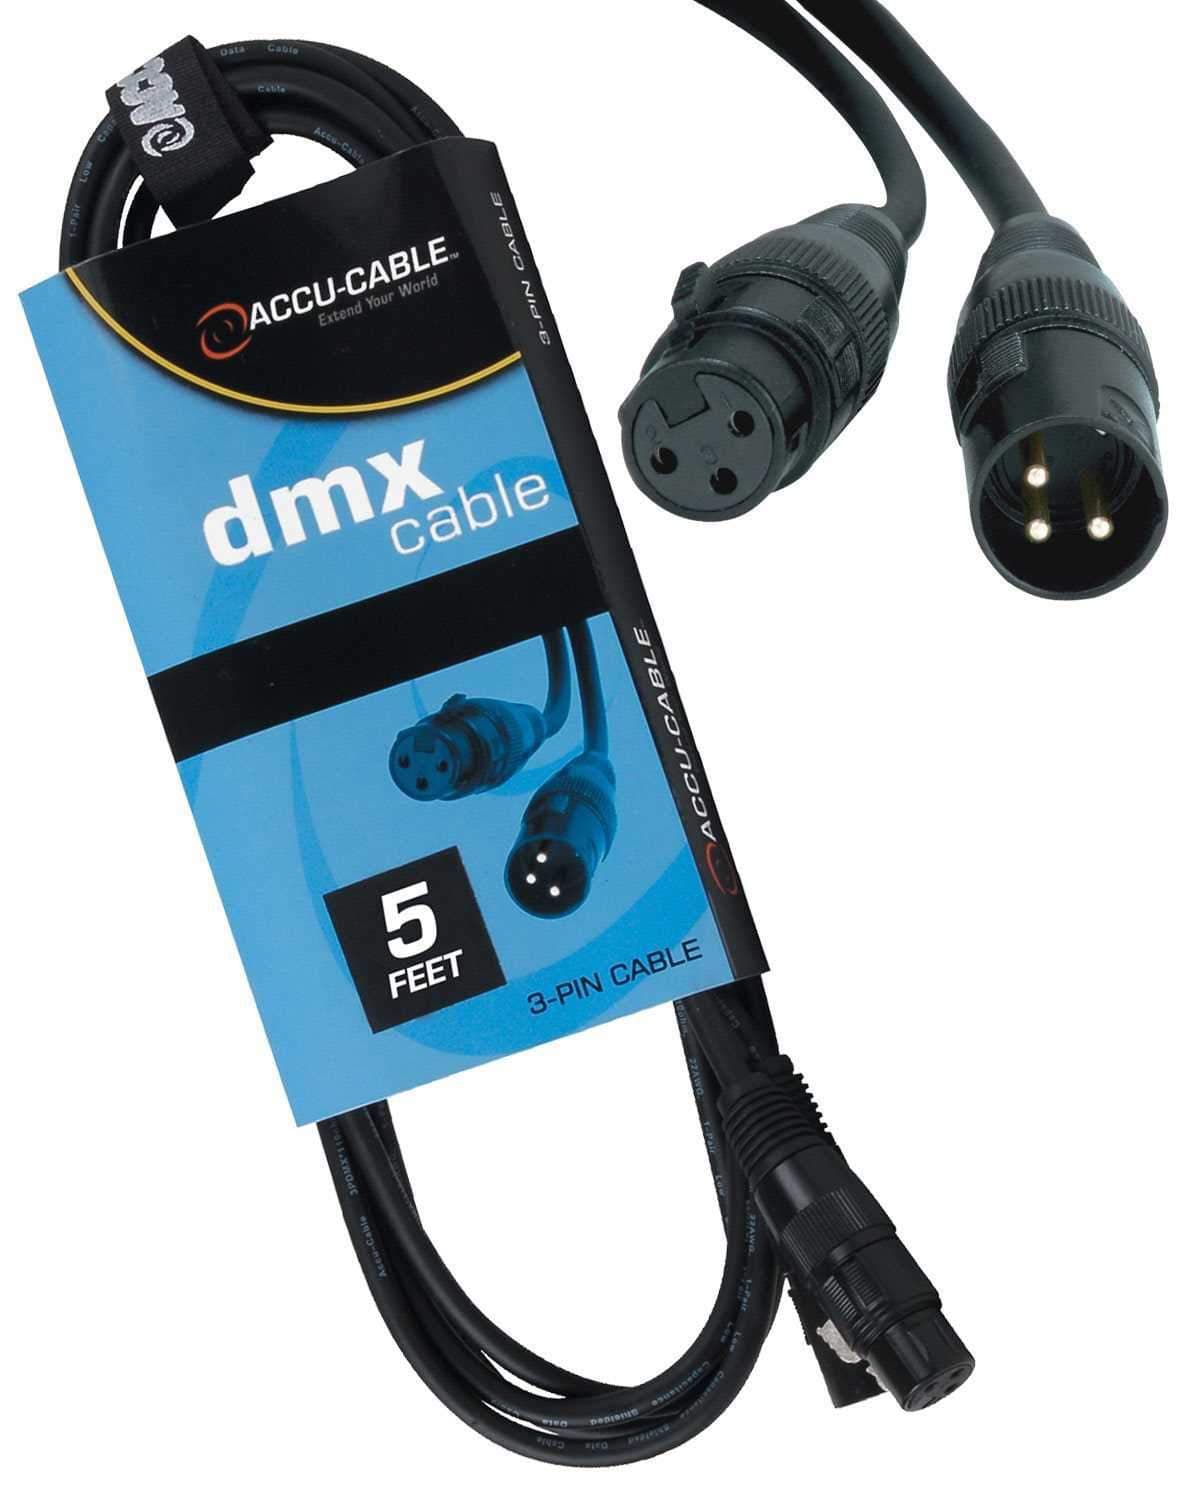 Accu-Cable 3-Pin XLR DMX Light Cable 5 Foot - ProSound and Stage Lighting